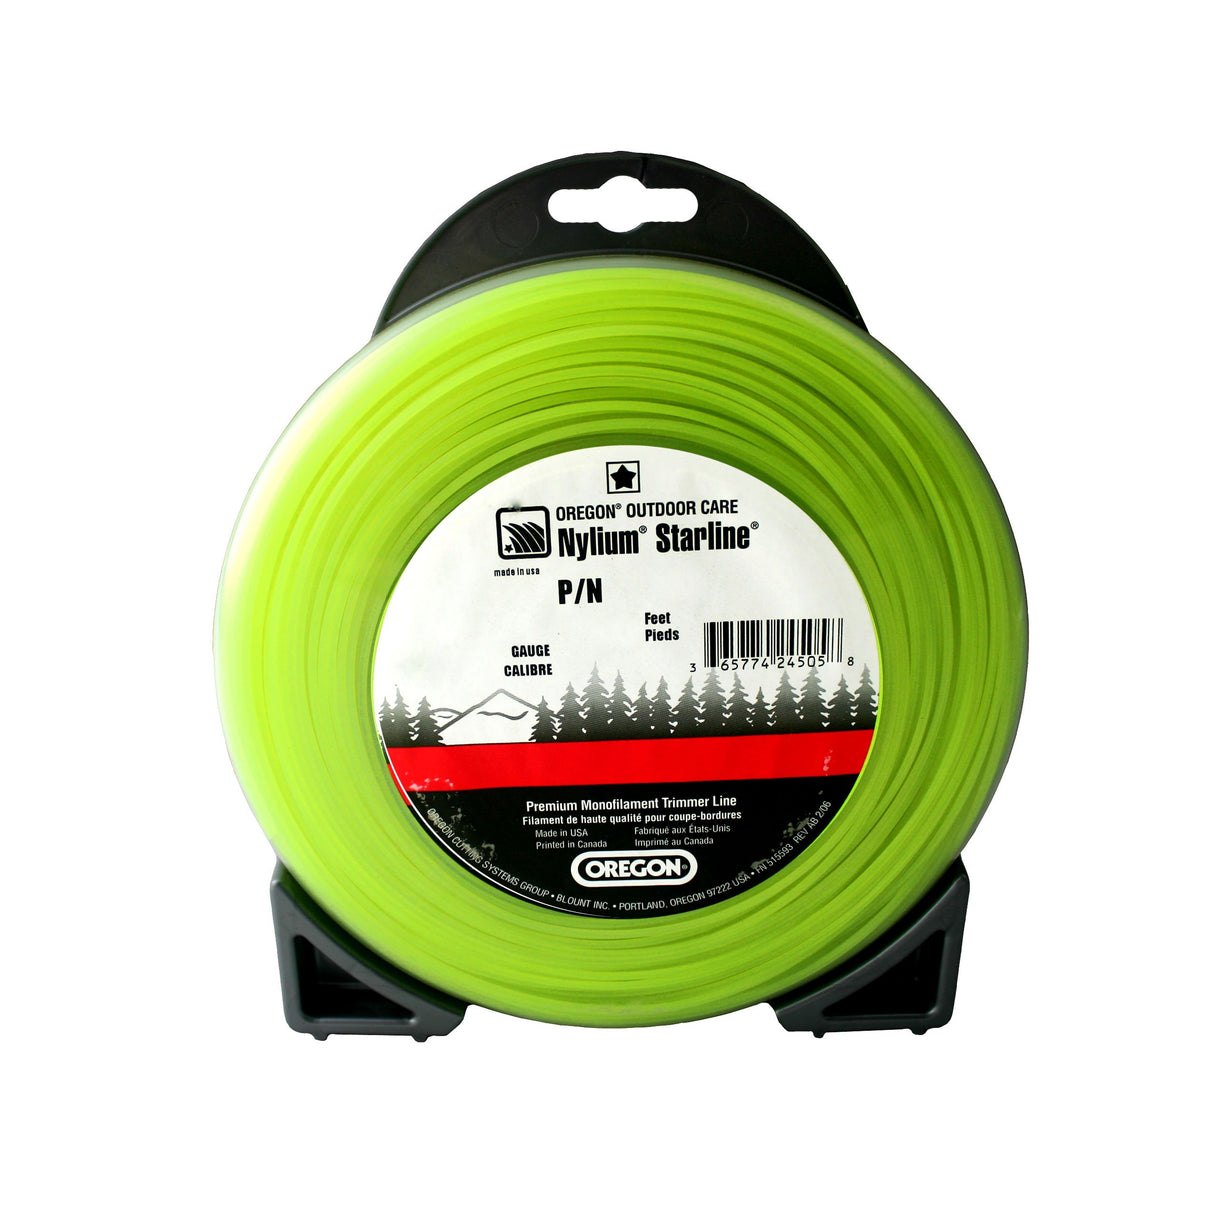 Oregon 110270 Nylium Starline 1/2-Pound Coil of .080-Inch-by-190-Foot String Trimmer Line, Green (Discontinued by Manufacturer)